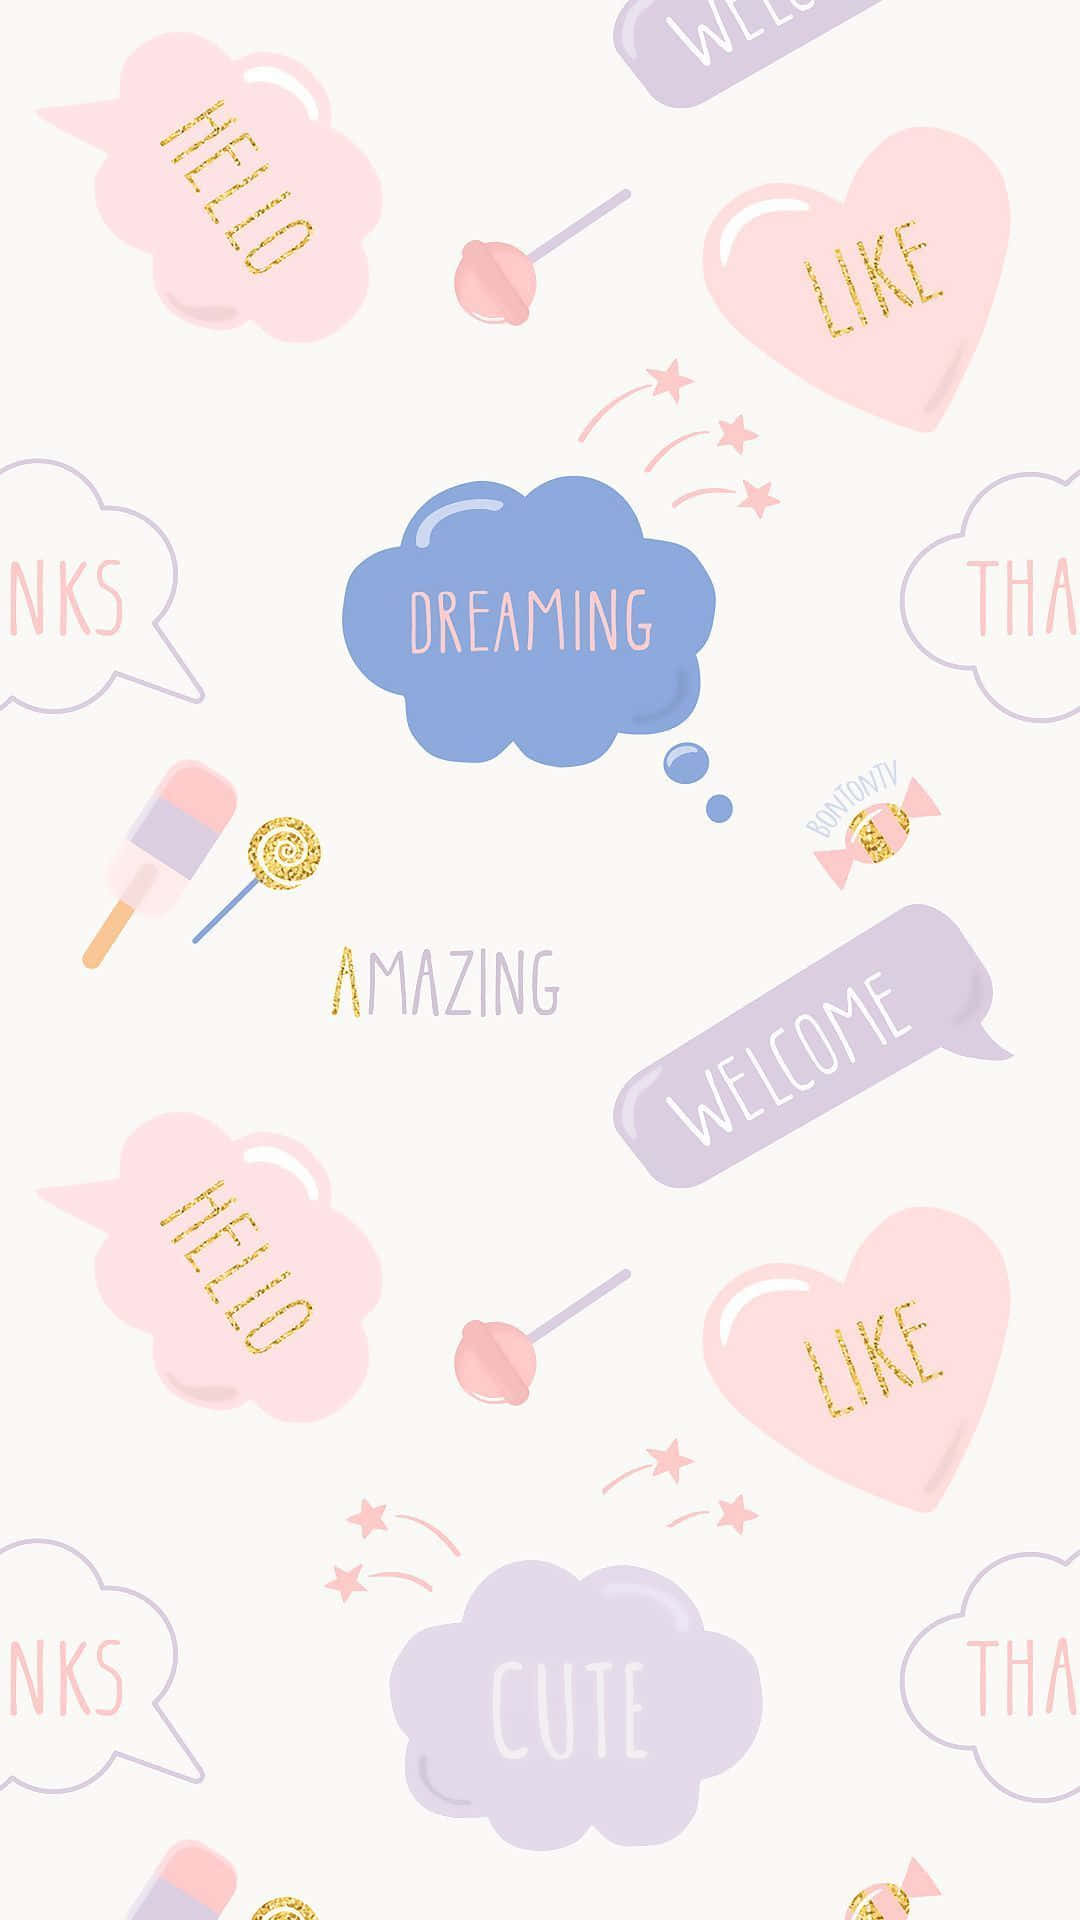 Brighten up your day with a cute pastel background